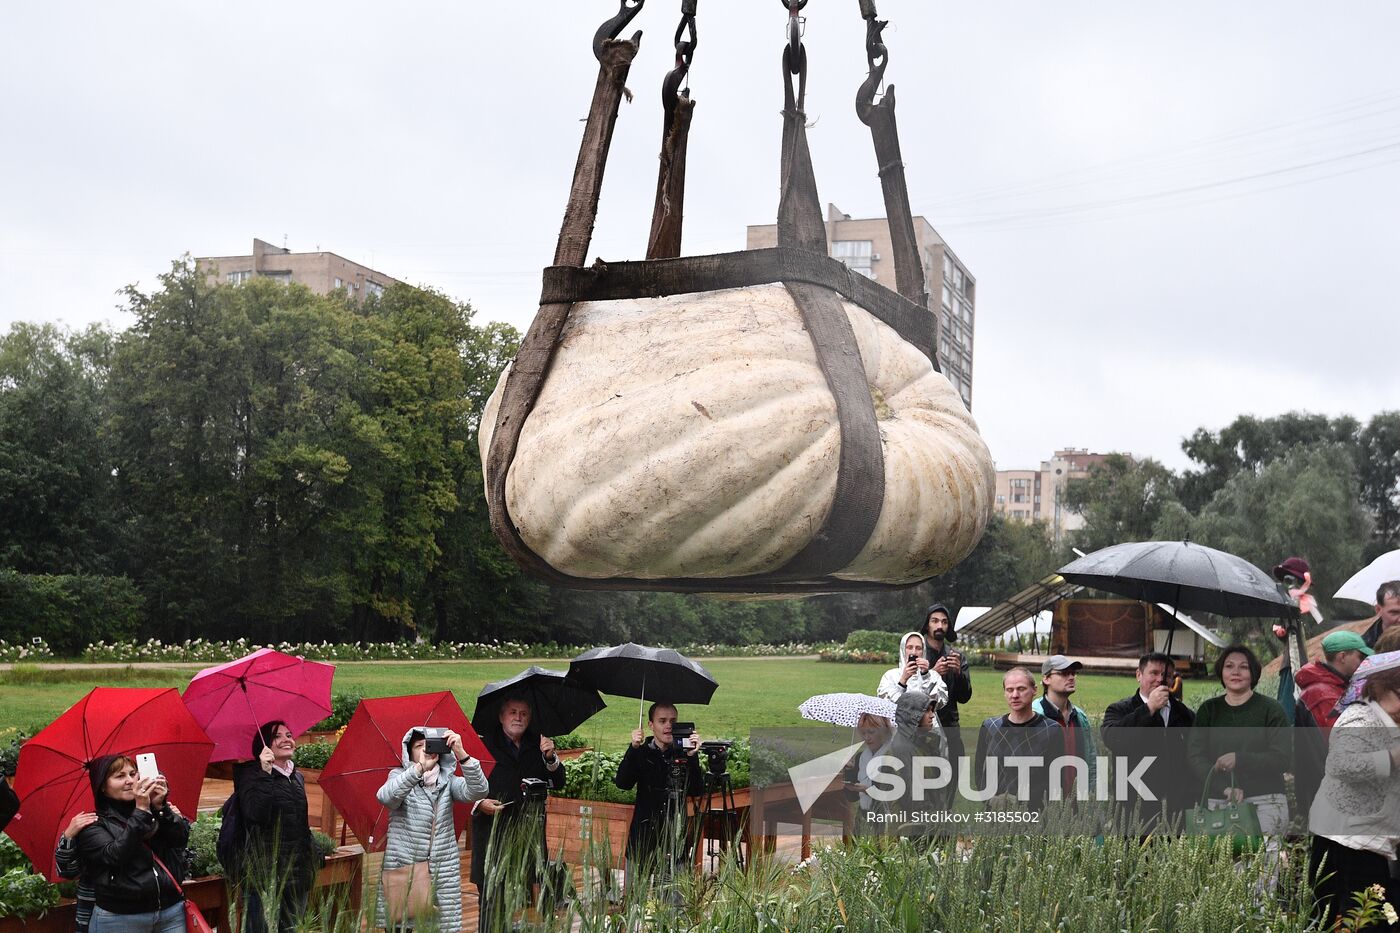 Presentation of the largest pumpkin in Moscow